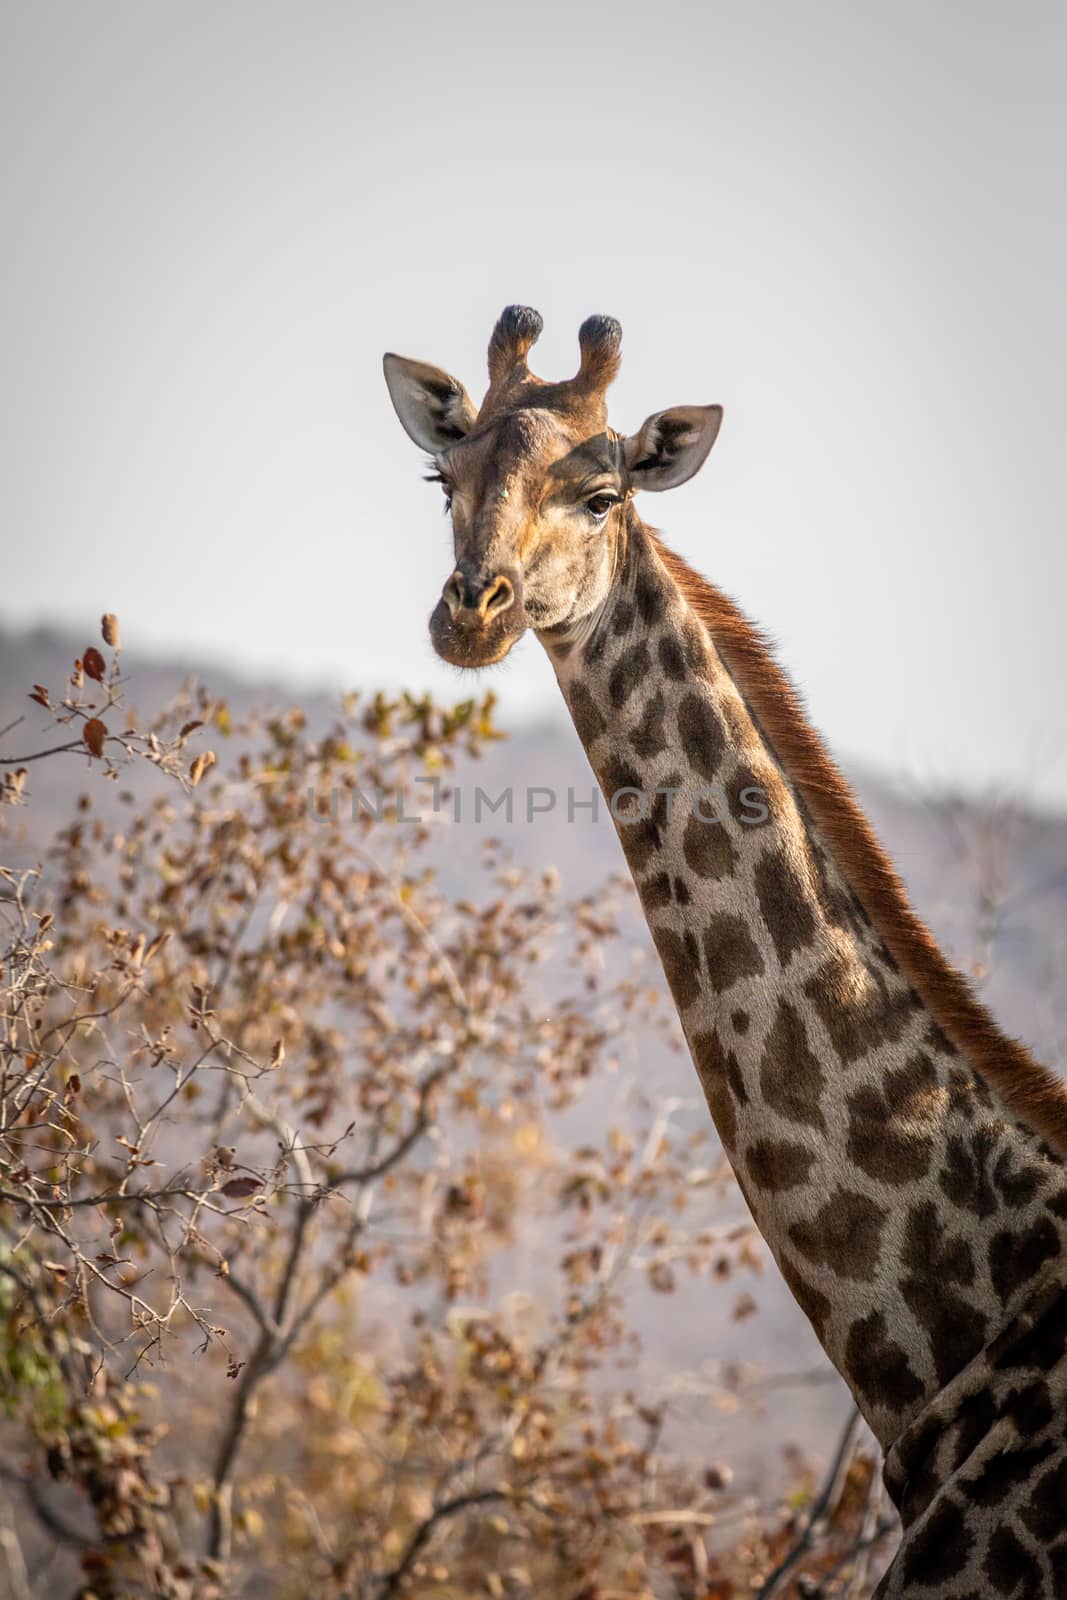 Giraffe looking at the camera in the Welgevonden game reserve, South Africa